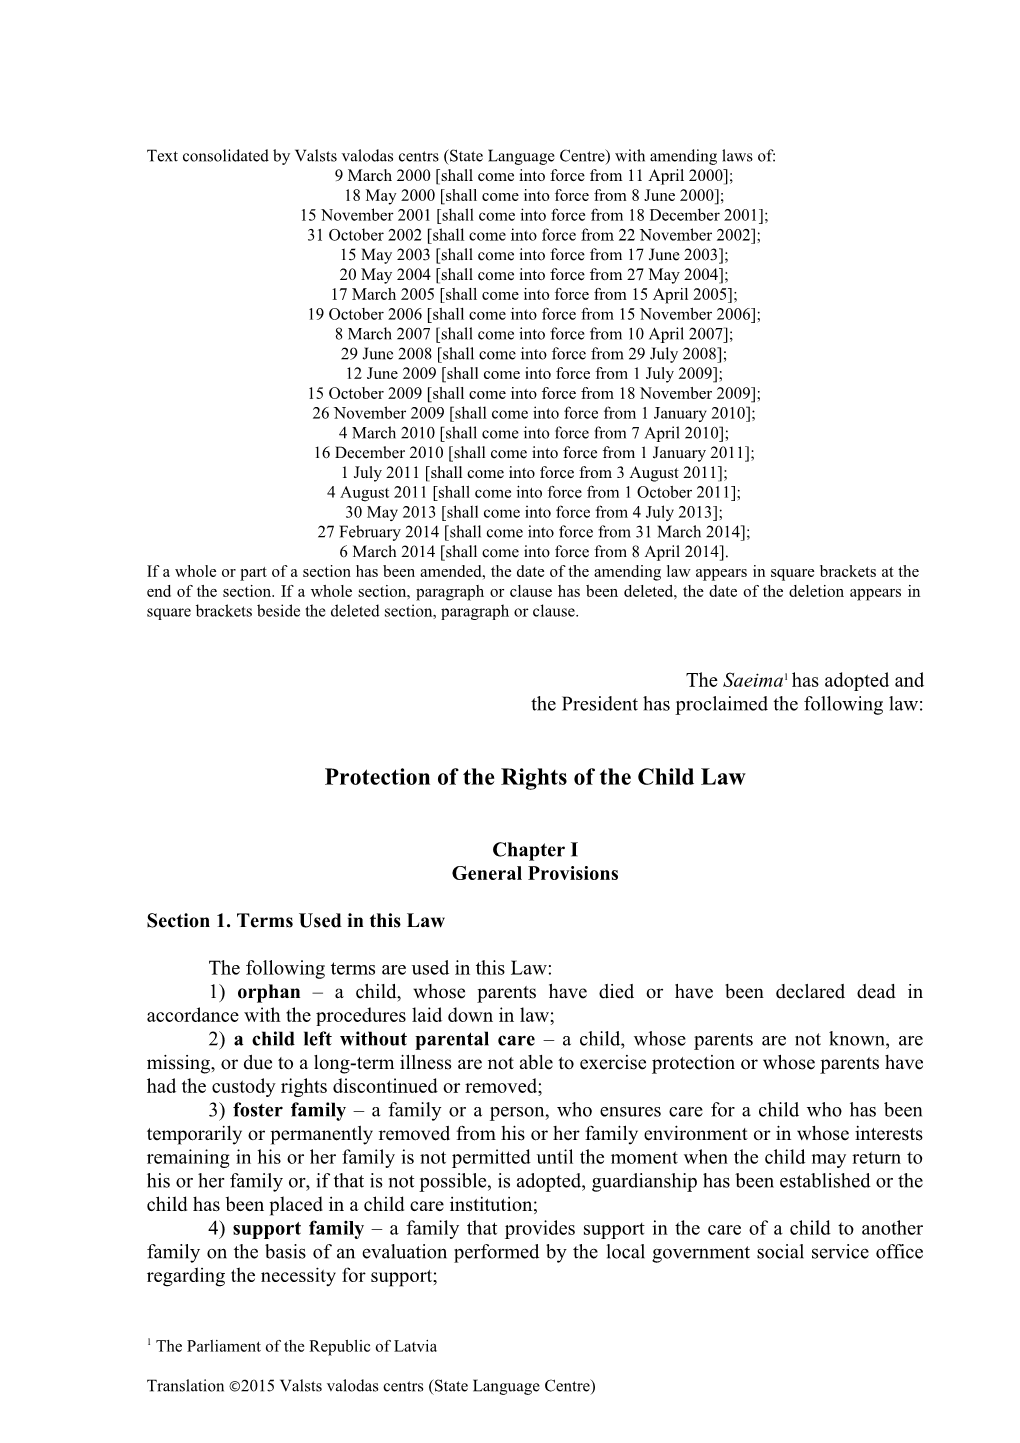 Text Consolidated by Valsts Valodas Centrs (State Language Centre) with Amending Laws Of s4